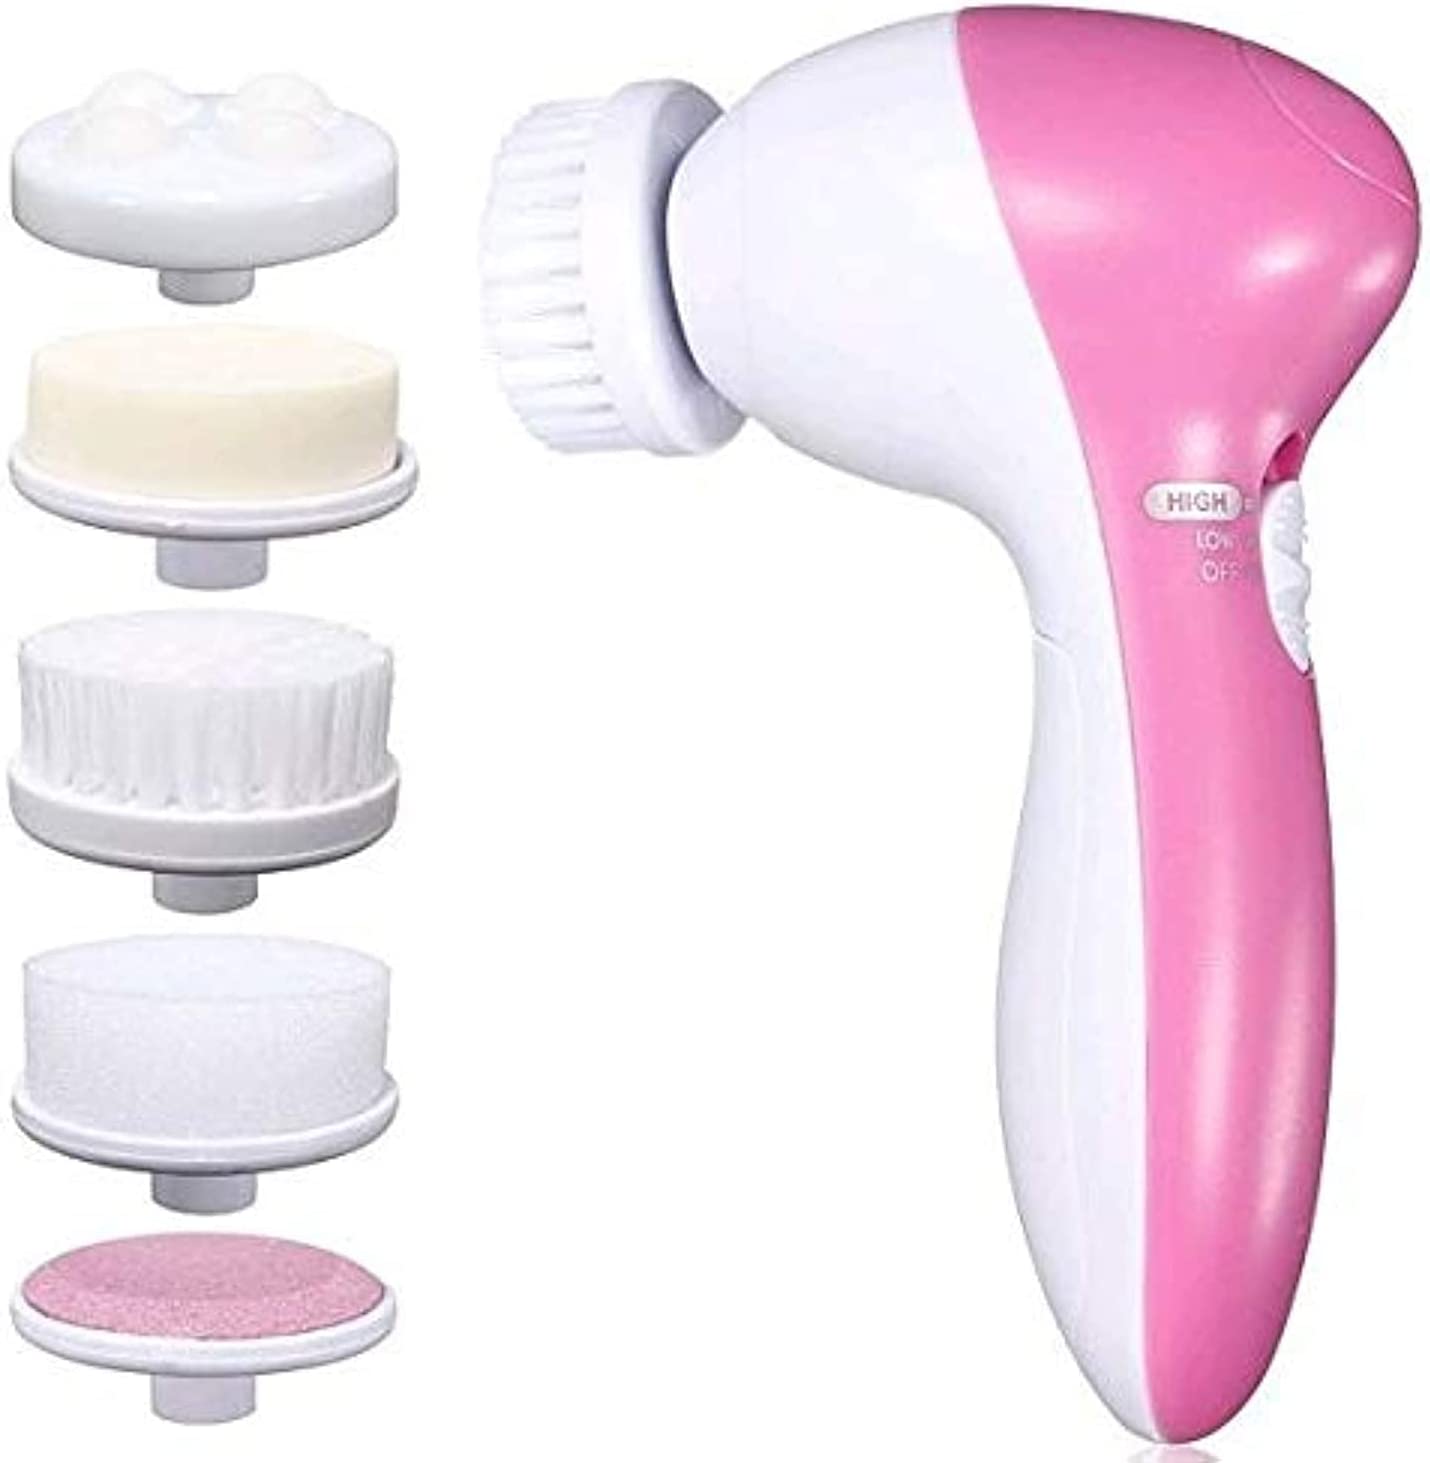 Portable Facial Skin Care and Massager - White and Pink